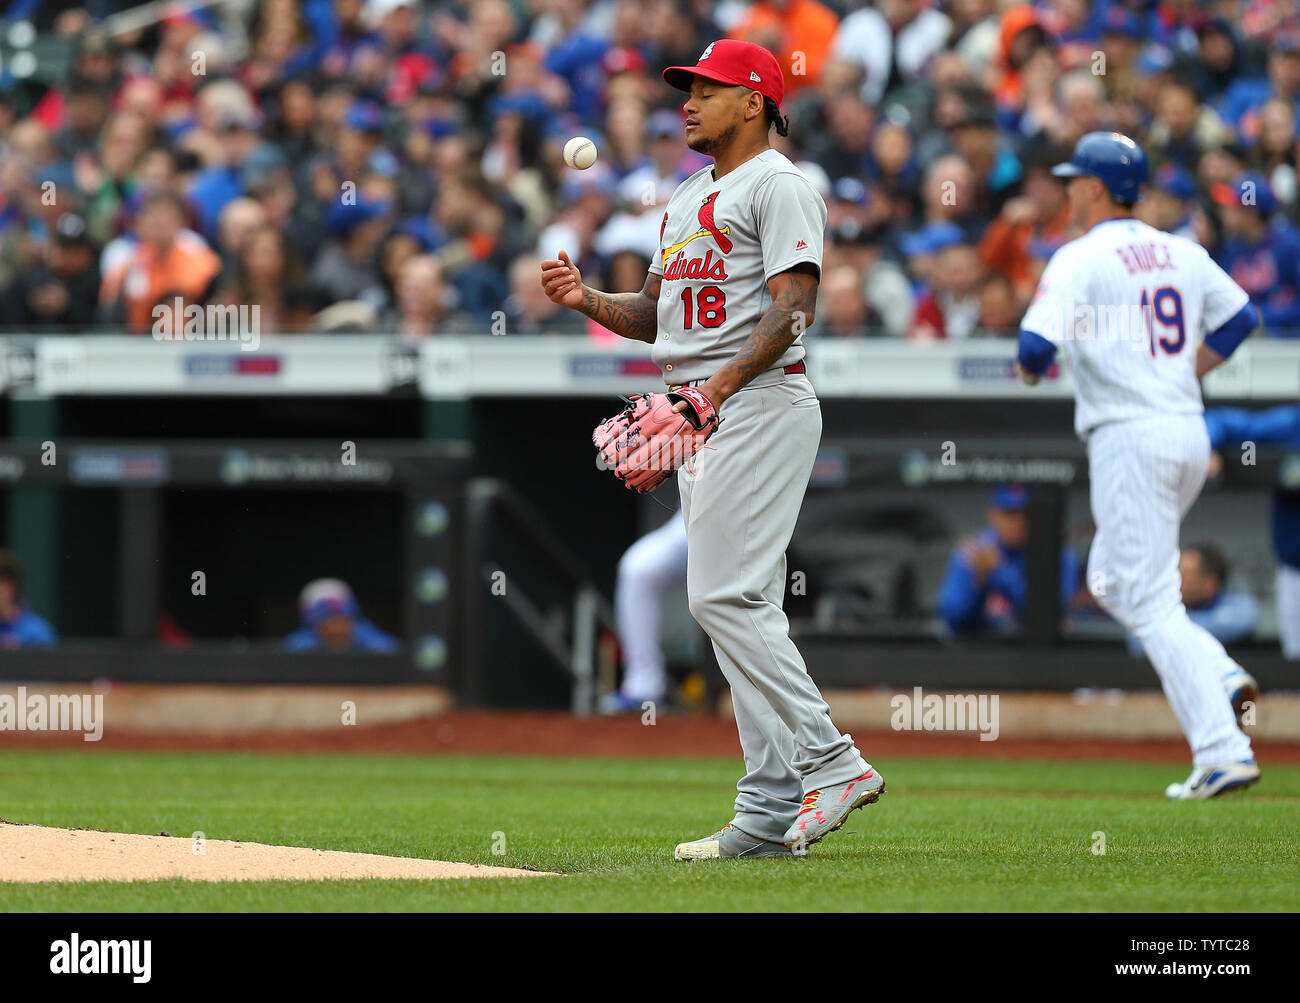 St. Louis Cardinals pitcher Carlos Martinez #18 reacts after walking  New York Mets Jay Bruce #19 to load the bases in the second inning on Opening Day at Citi Field in New York City on March 29, 2018.   Photo by Rich Schultz/UPI Stock Photo